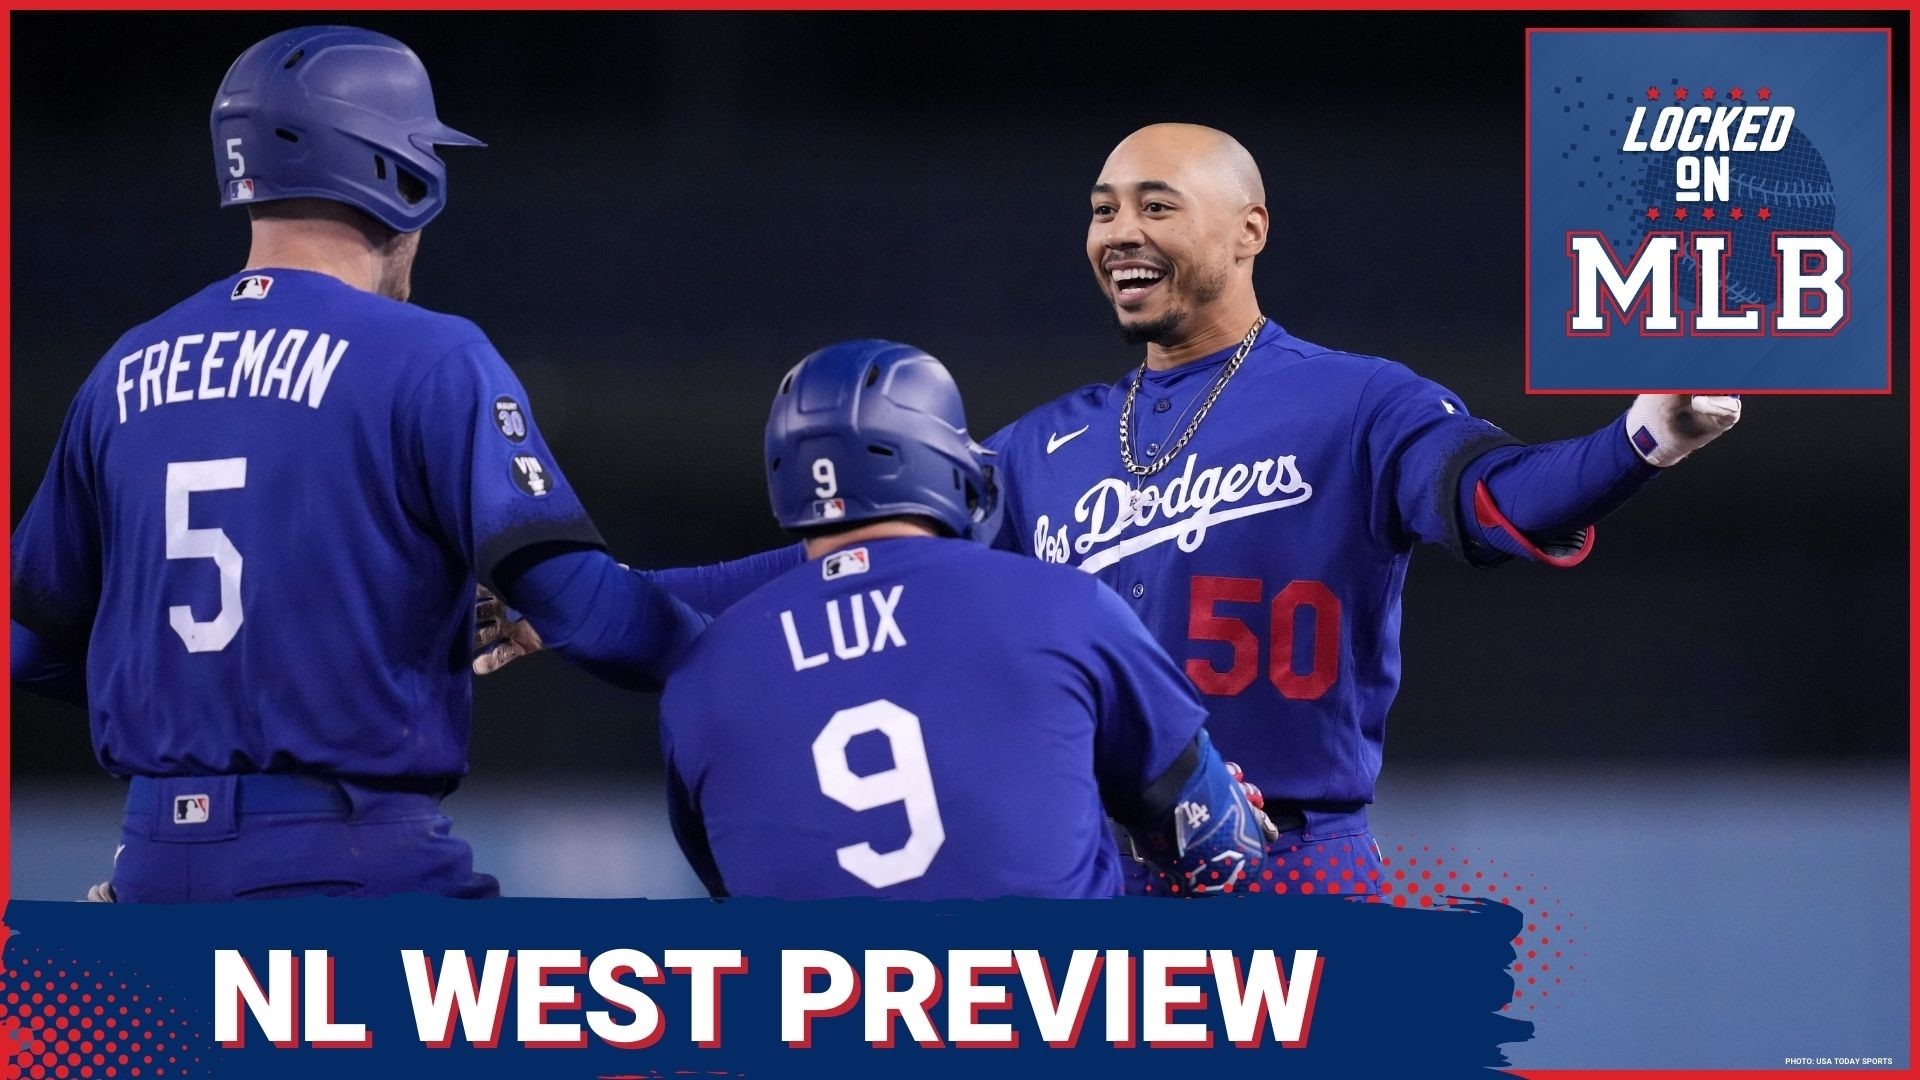 A special edition of Lock On MLB previewing the NL West division for the upcoming 2023 season. The teams to watch and who could win it all.